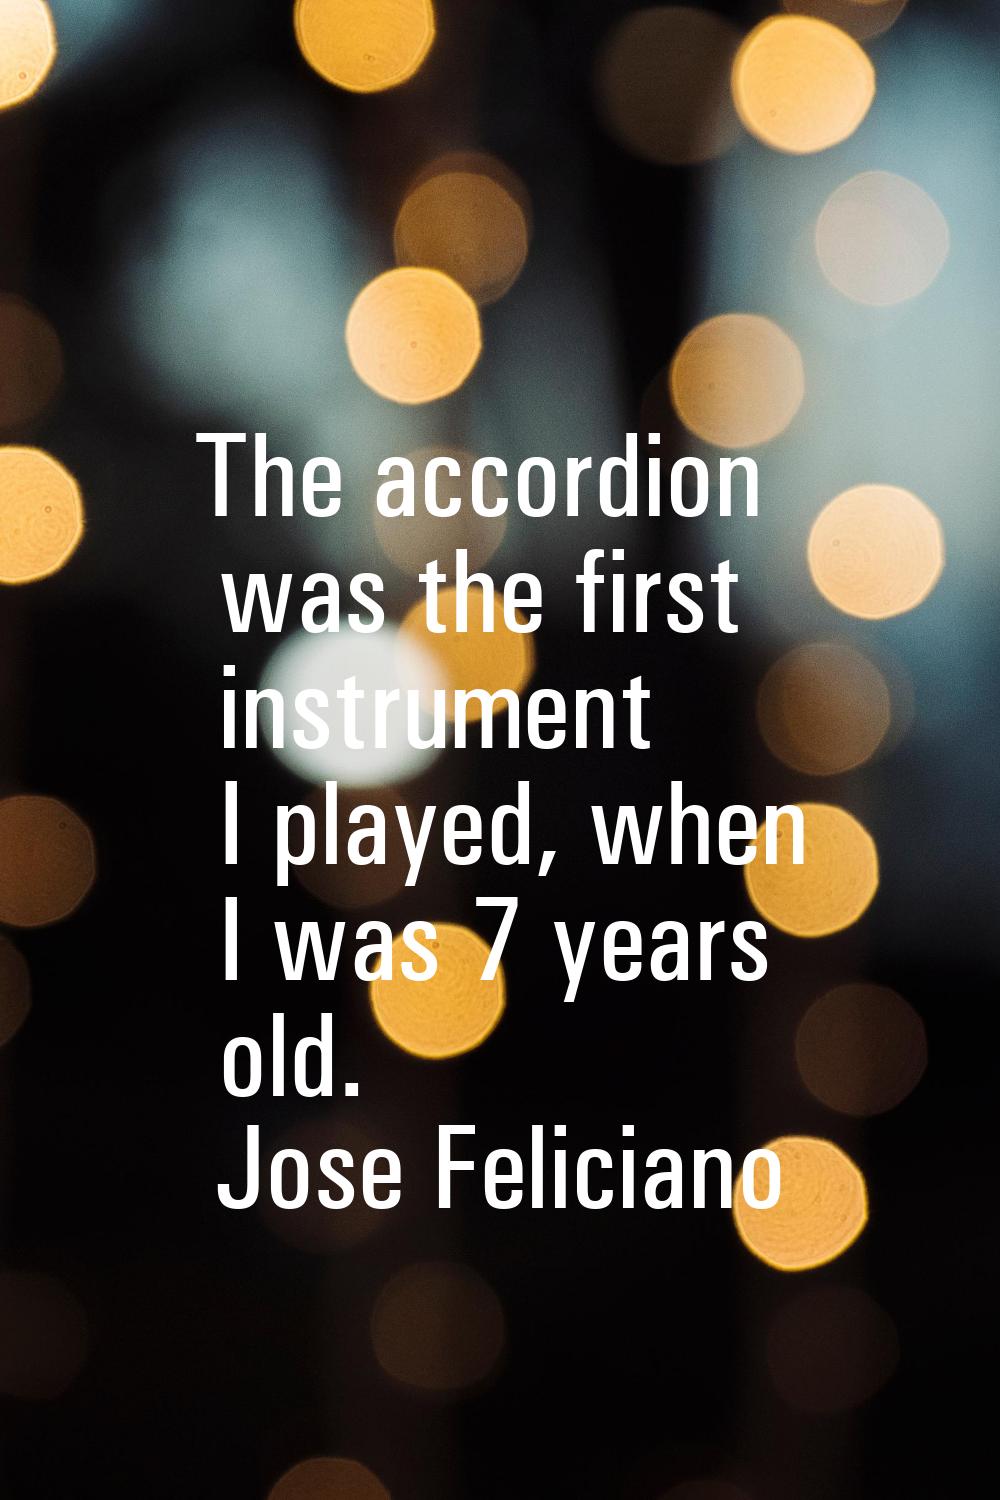 The accordion was the first instrument I played, when I was 7 years old.